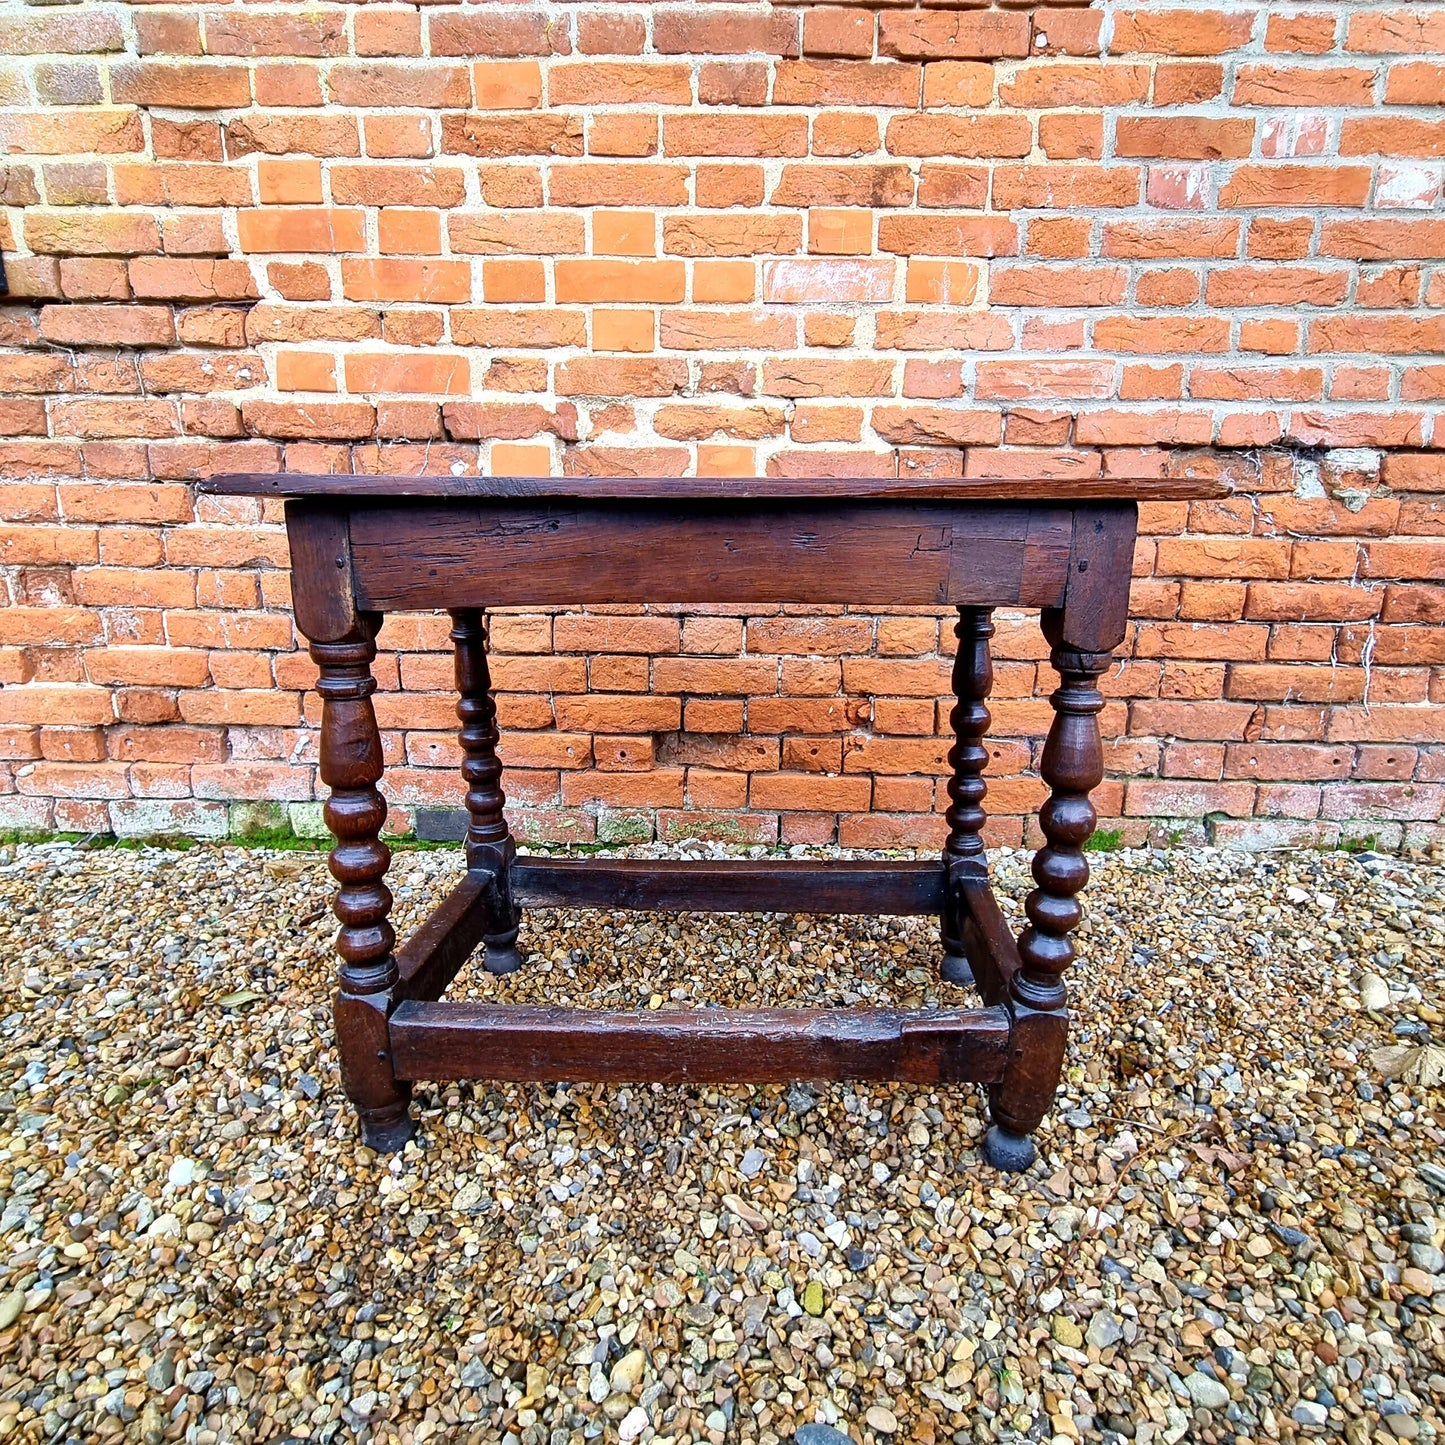 Ex Clive Sherwood Collection - A 17th Century English Antique Oak Side Table